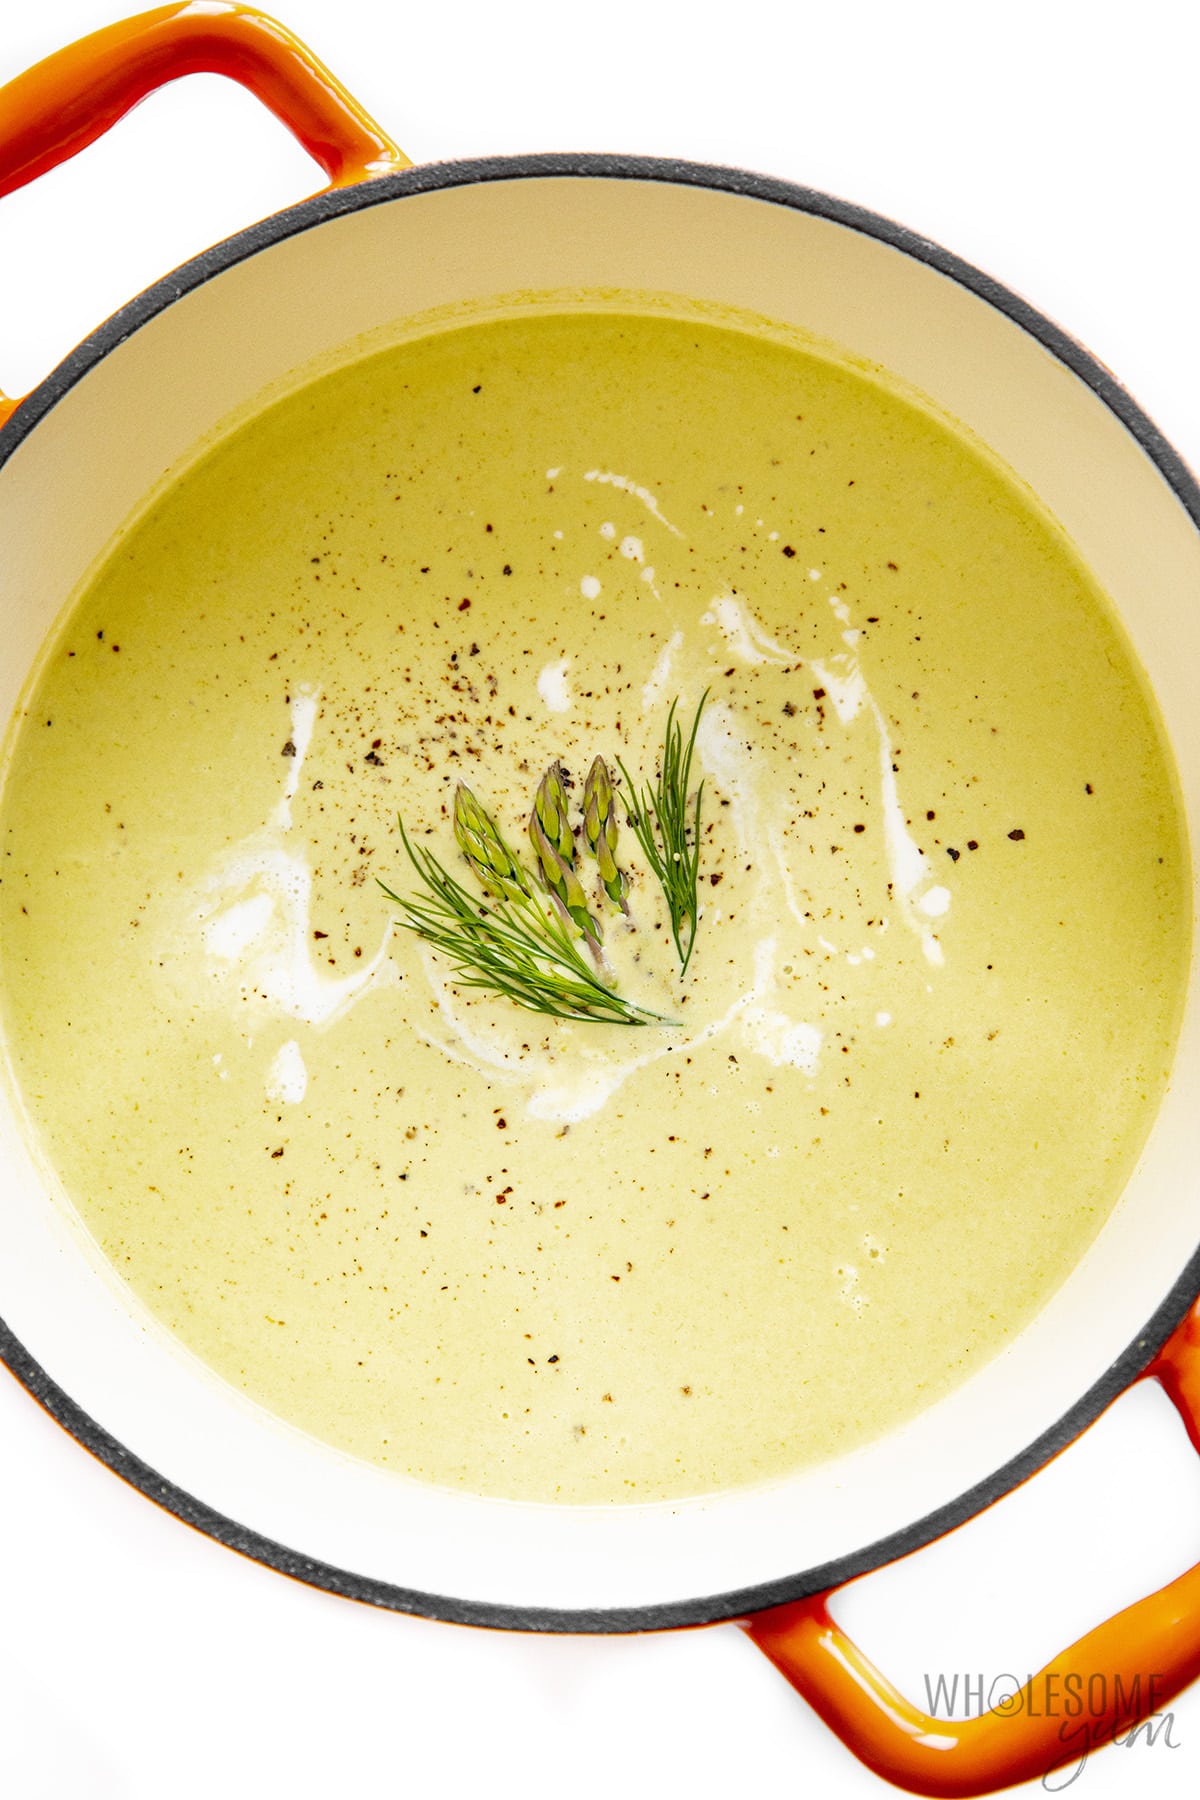 Cream of asparagus soup garnished with herbs and cream in a Dutch oven.